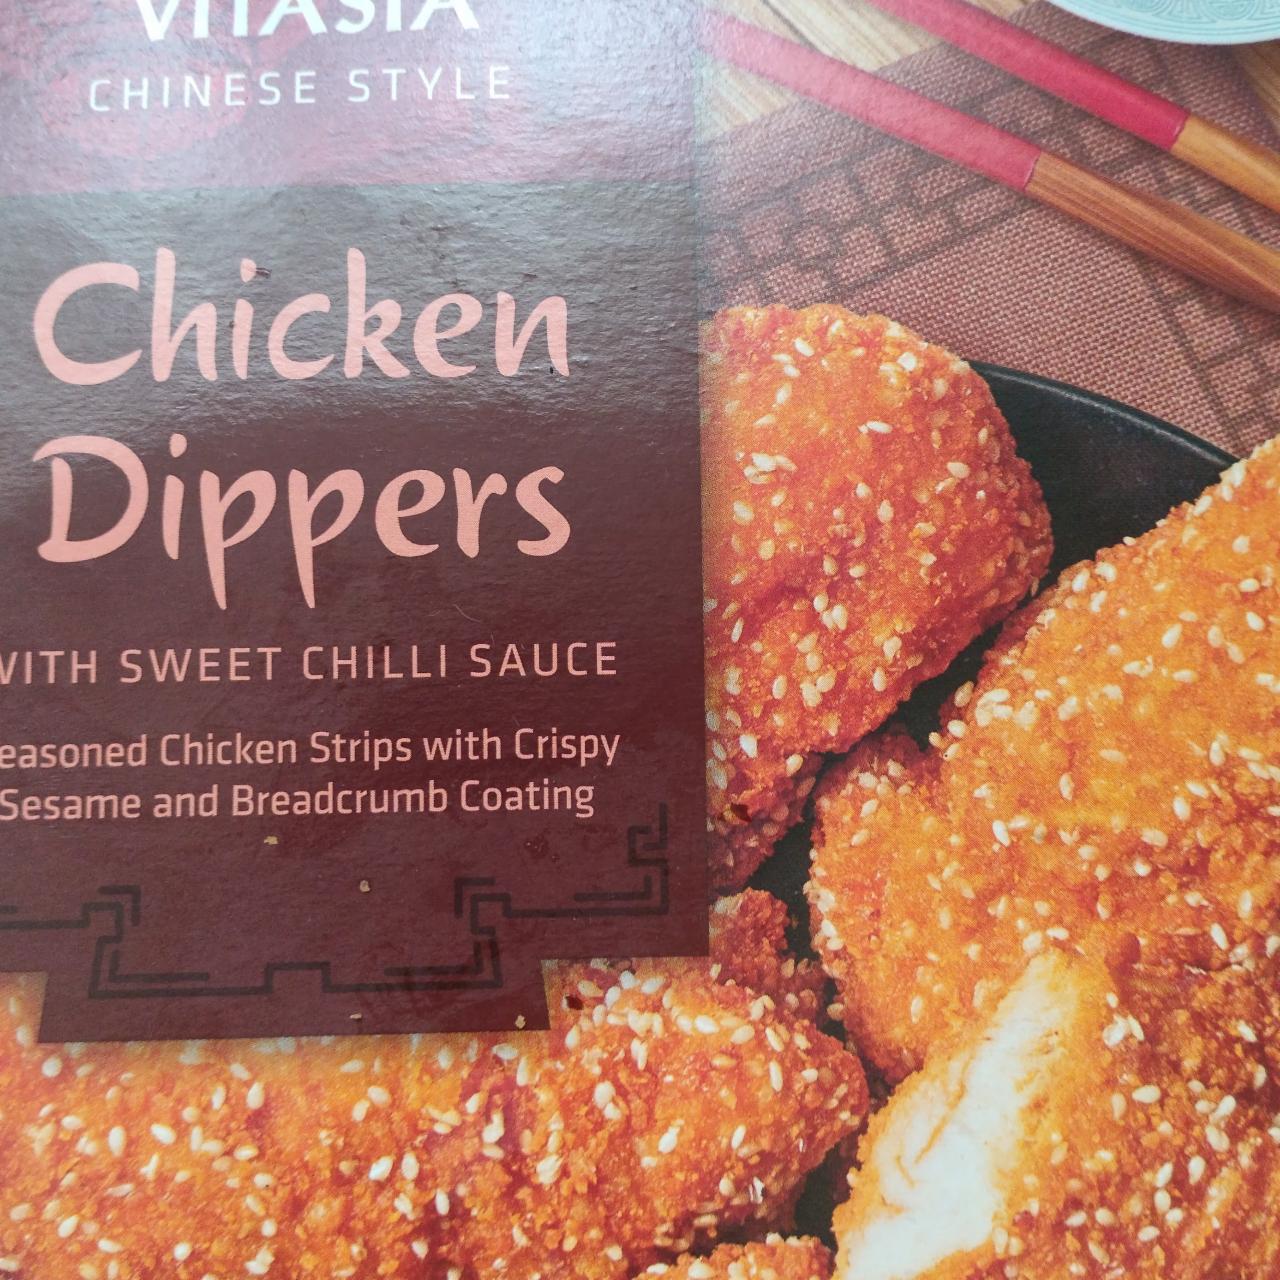 Fotografie - Chinese style Chicken Dippers with sweet chilli sauce Vitasia